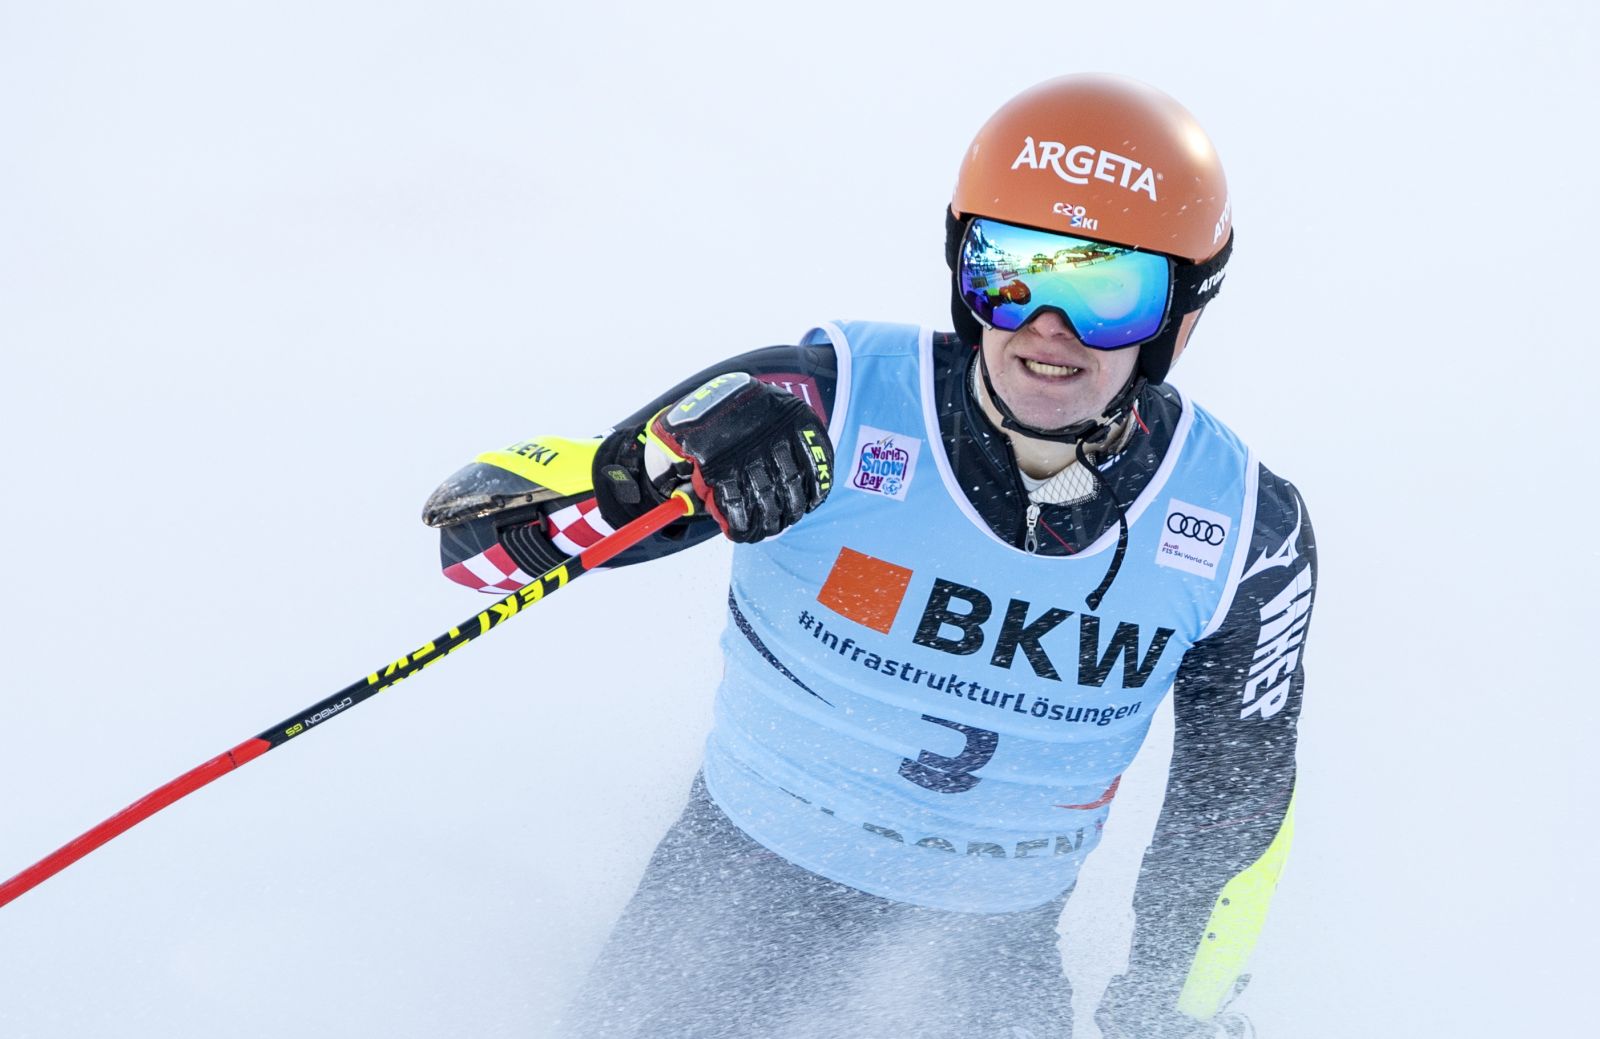 epa08926252 Filip Zubcic of Croatia reacts in the finish area during the second run of the men's giant slalom race at the FIS Alpine Skiing World Cup event in Adelboden, Switzerland, 08 January 2021.  EPA/PETER SCHNEIDER